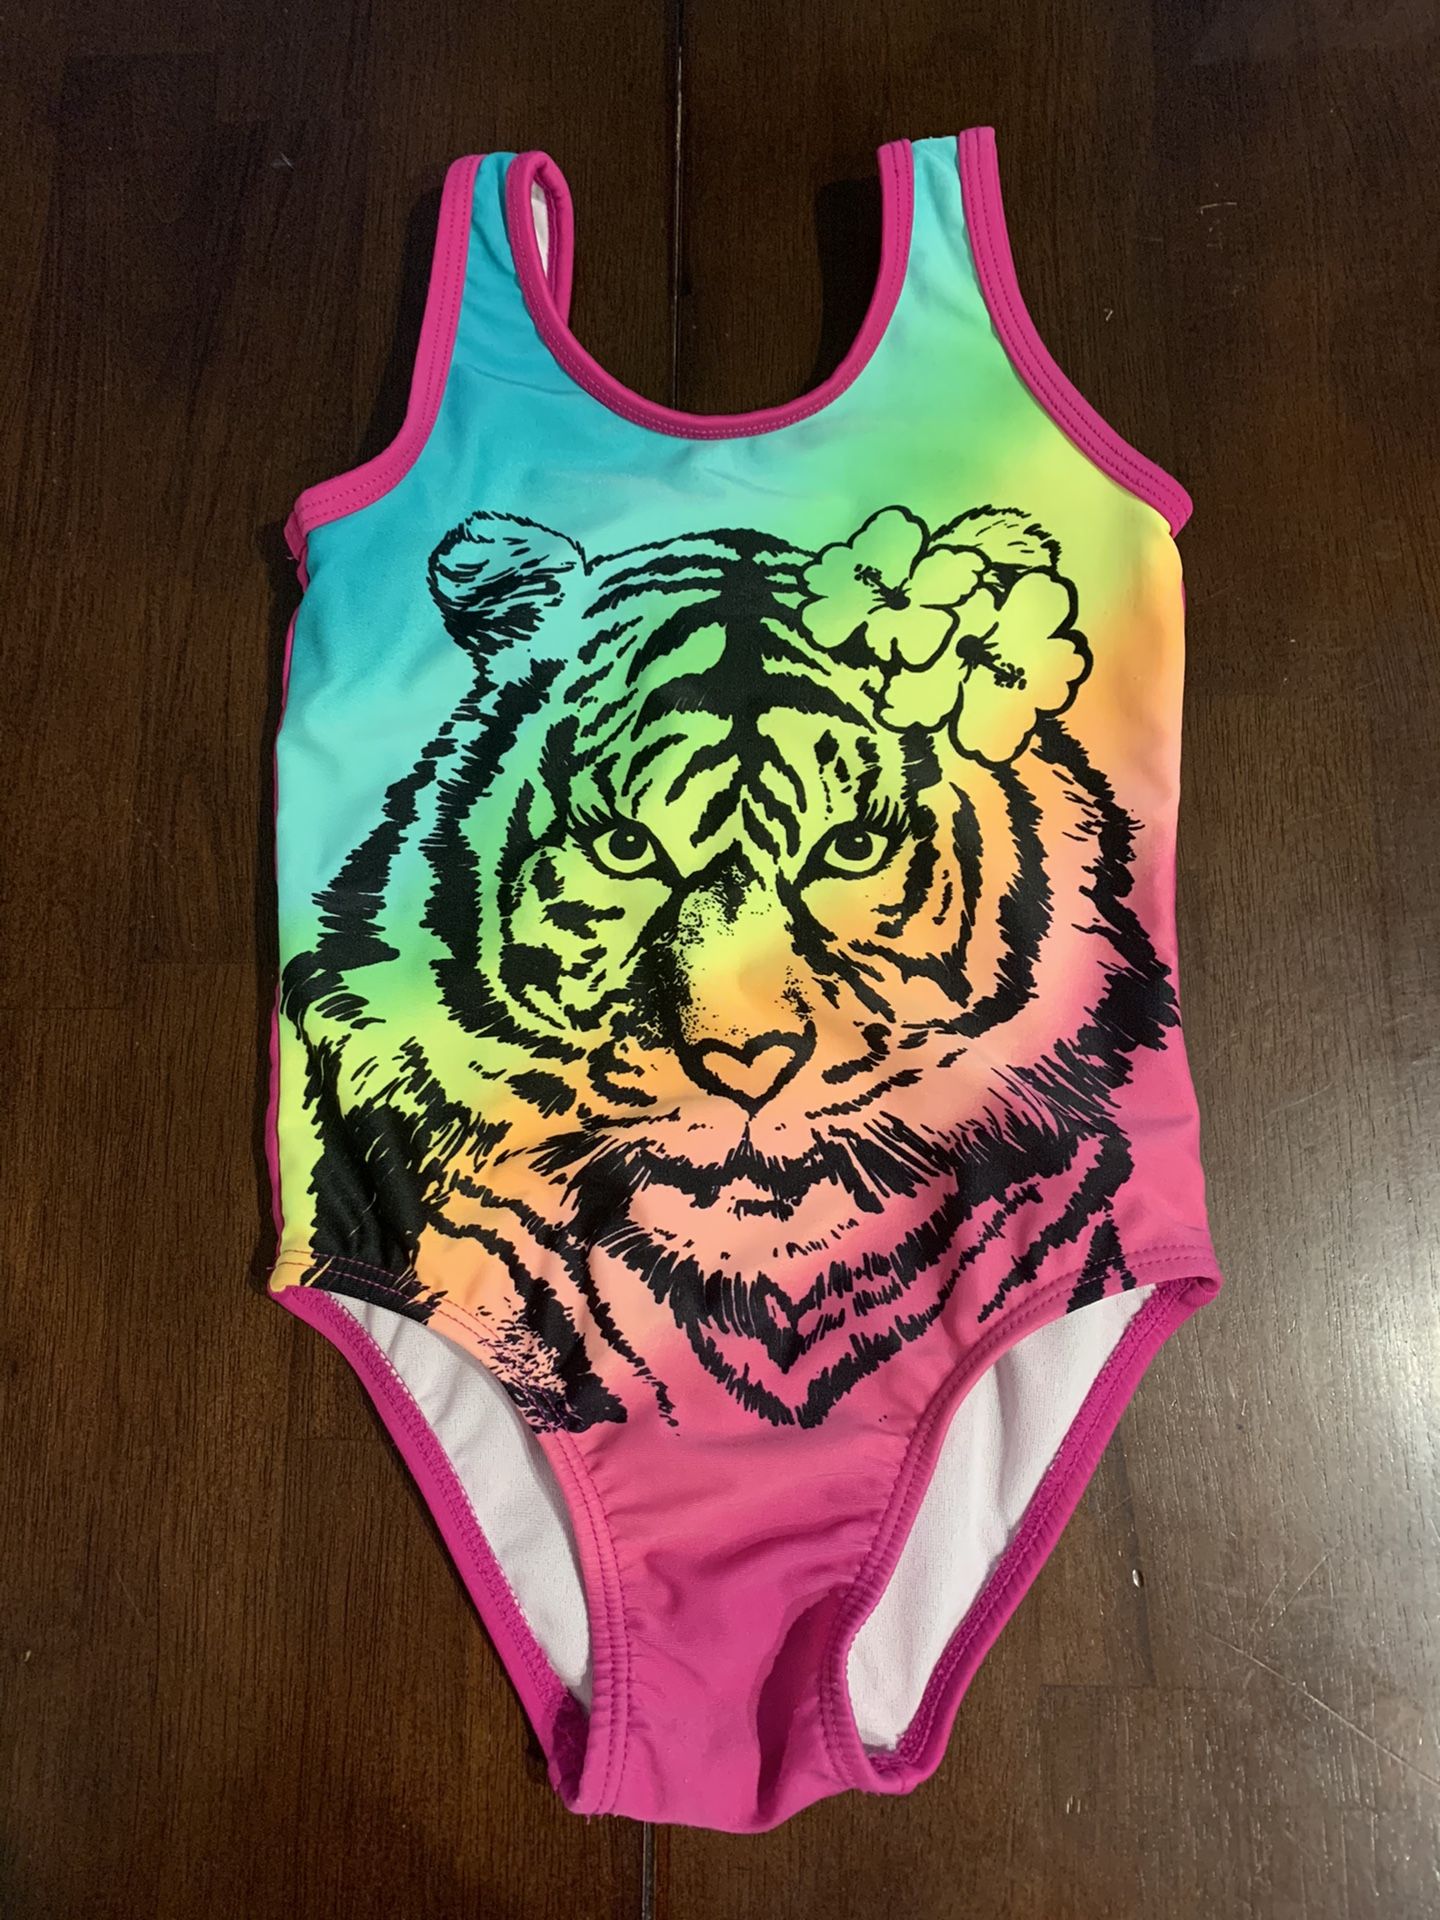 Size 2T girls one piece bathing suit